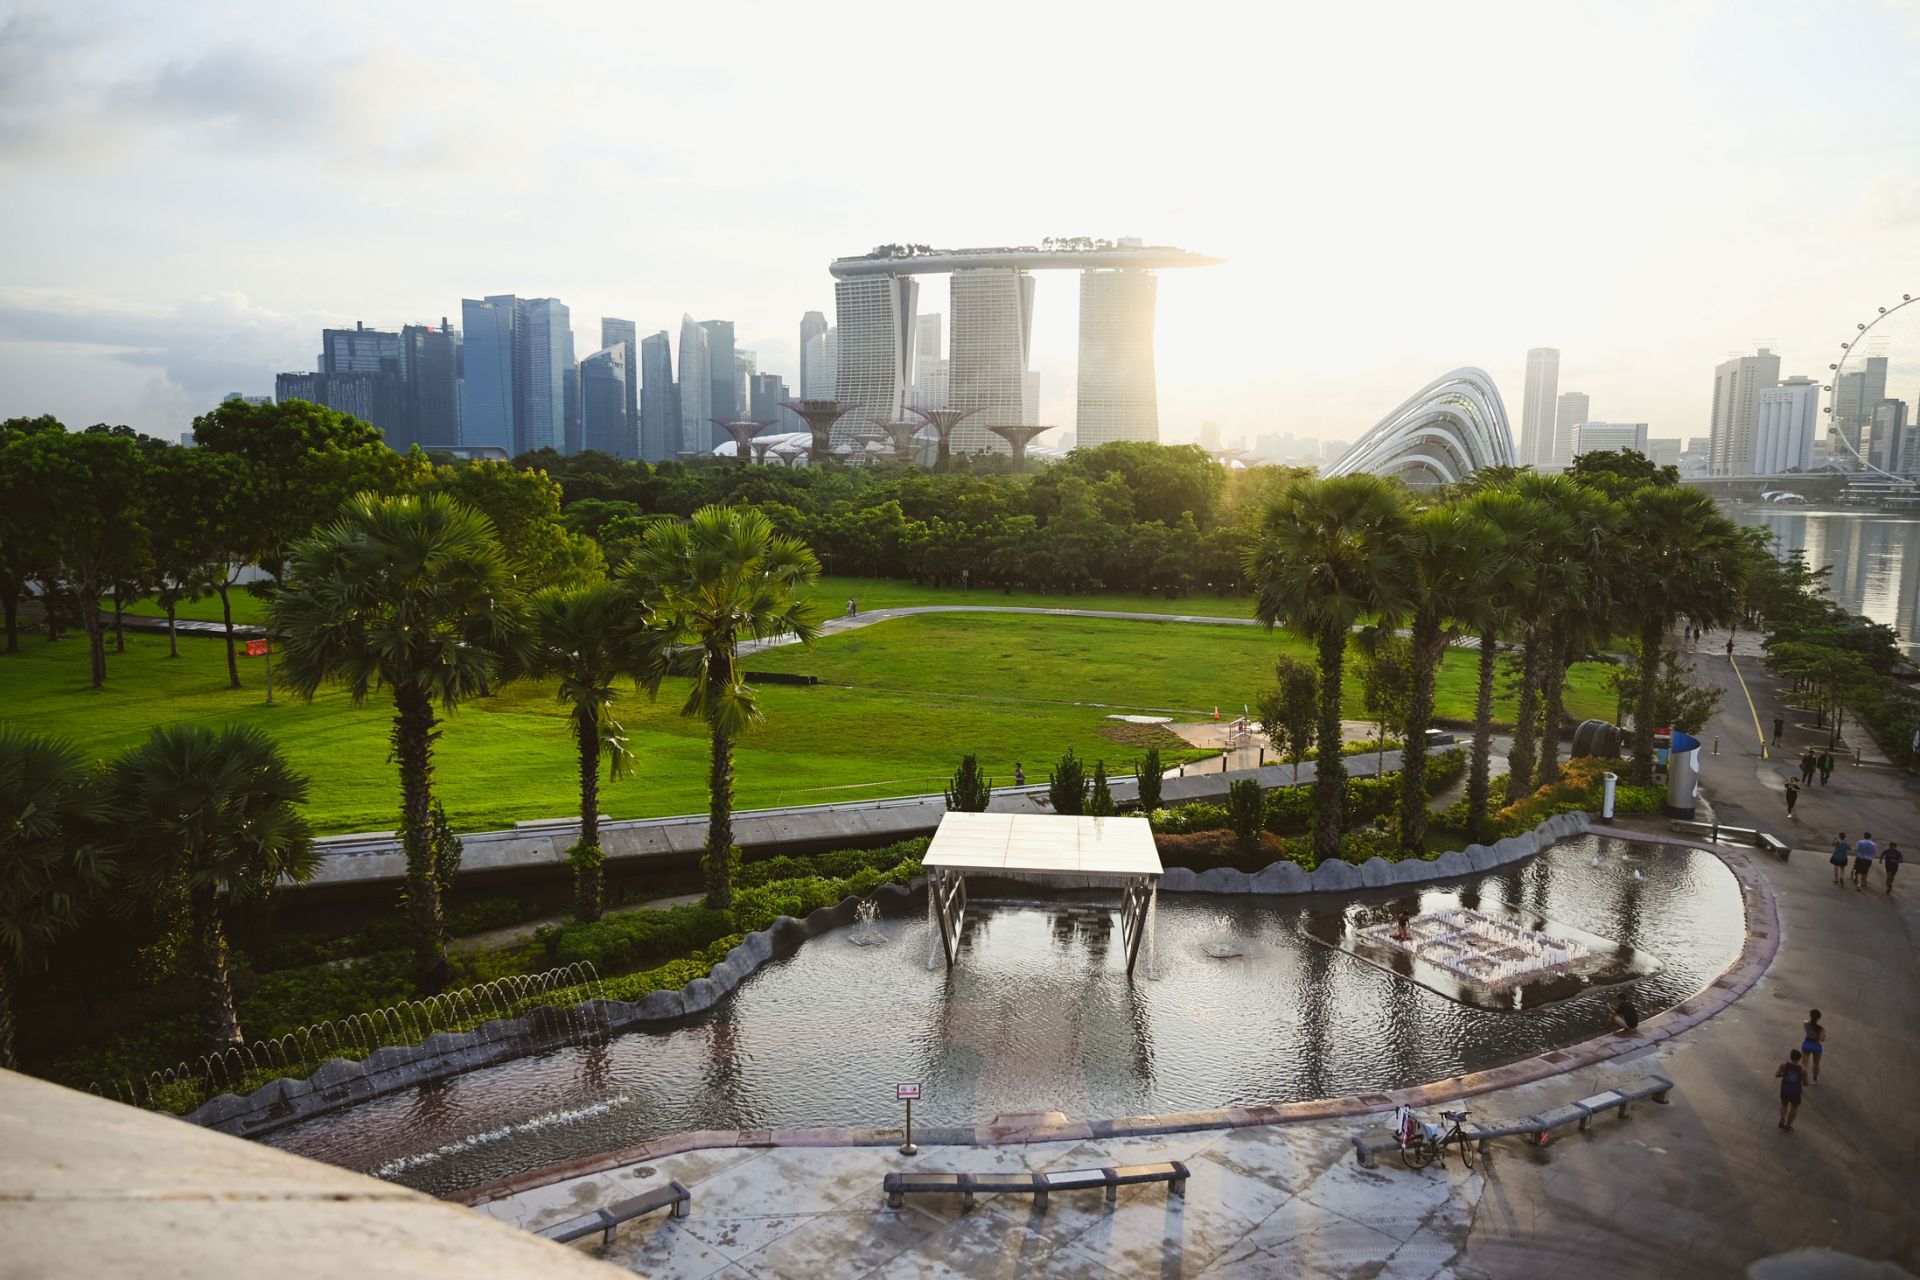 a park in Singapore, showing green grass and trees, with buildings in the background